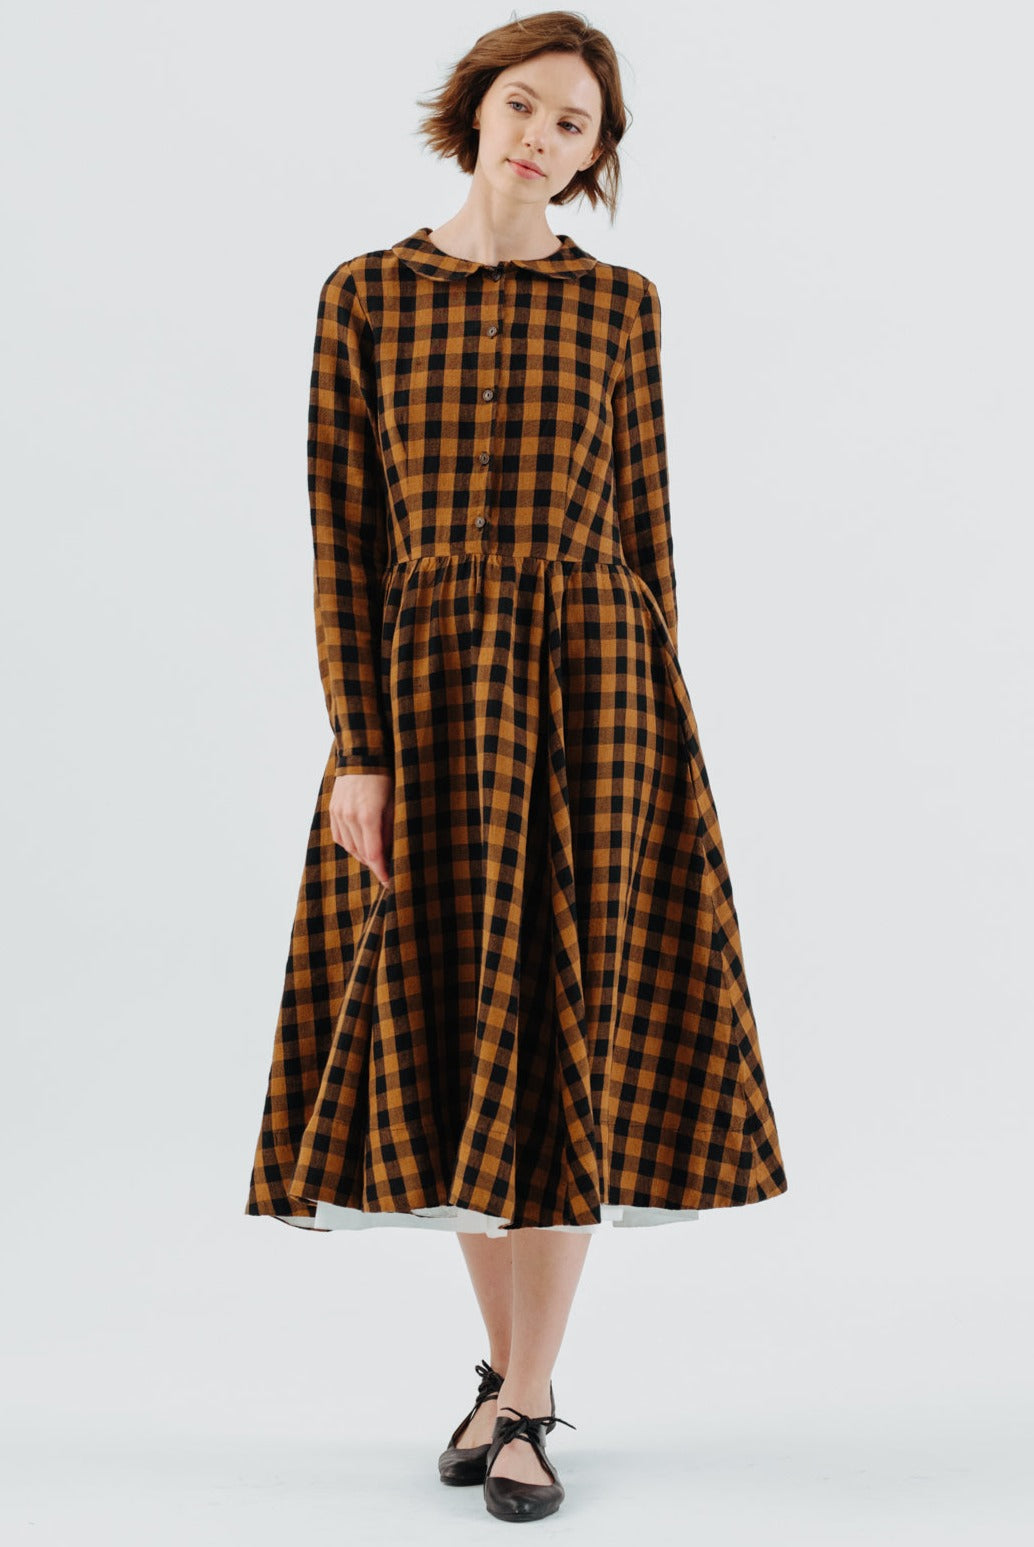 Classic Dress, Long Sleeve, Brown Checkers